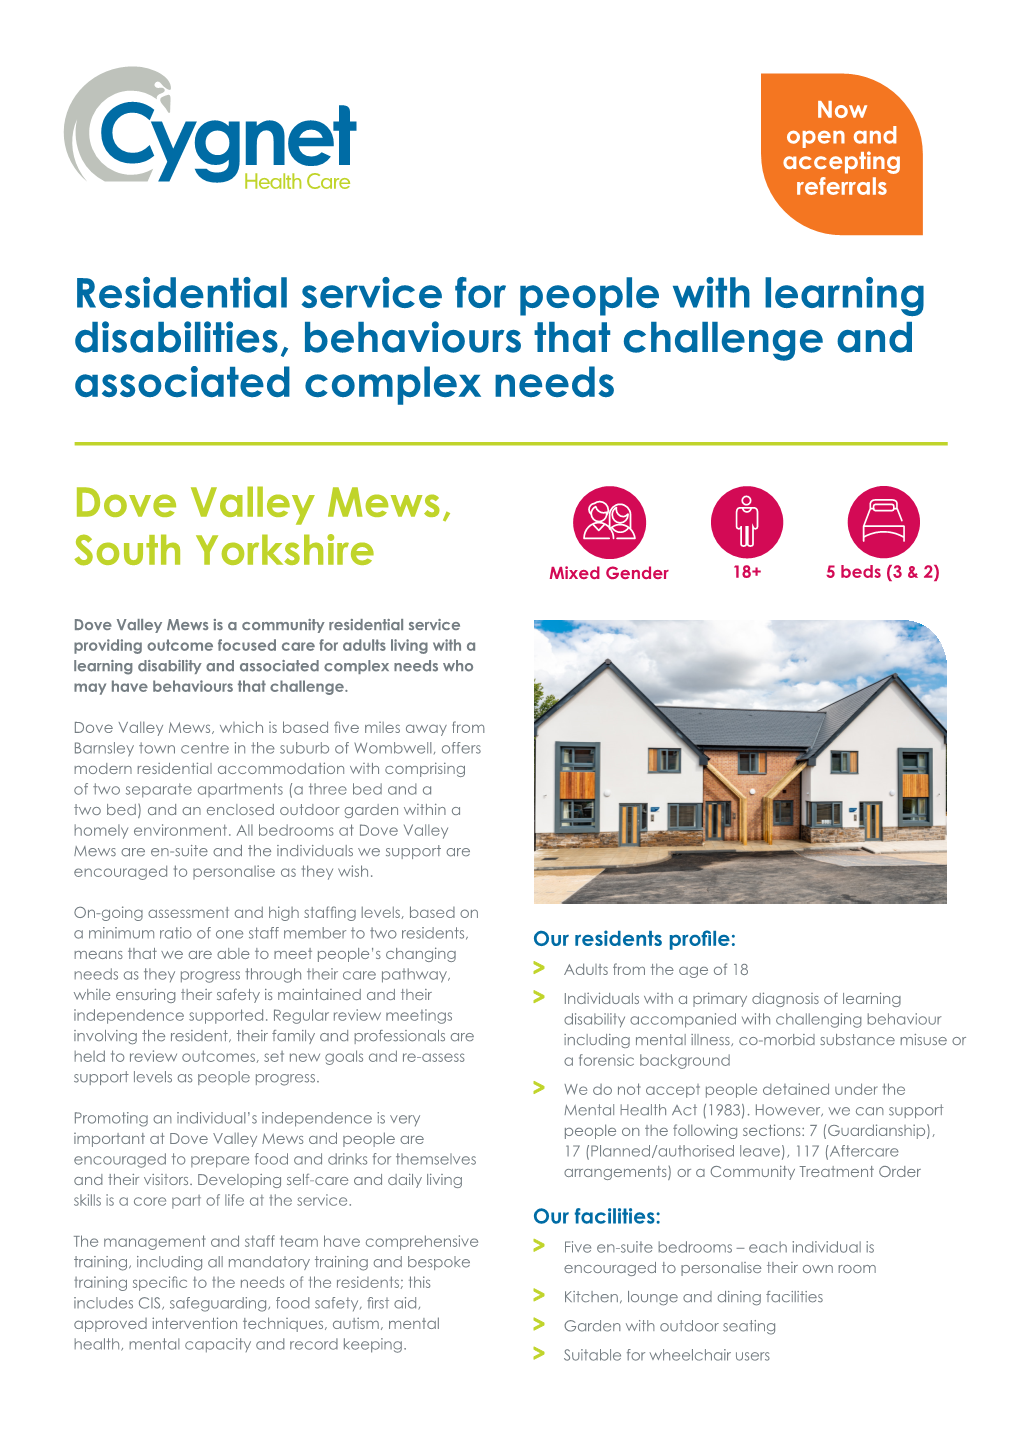 Dove Valley Mews, South Yorkshire Residential Service for People with Learning Disabilities, Behaviours That Challenge and Assoc